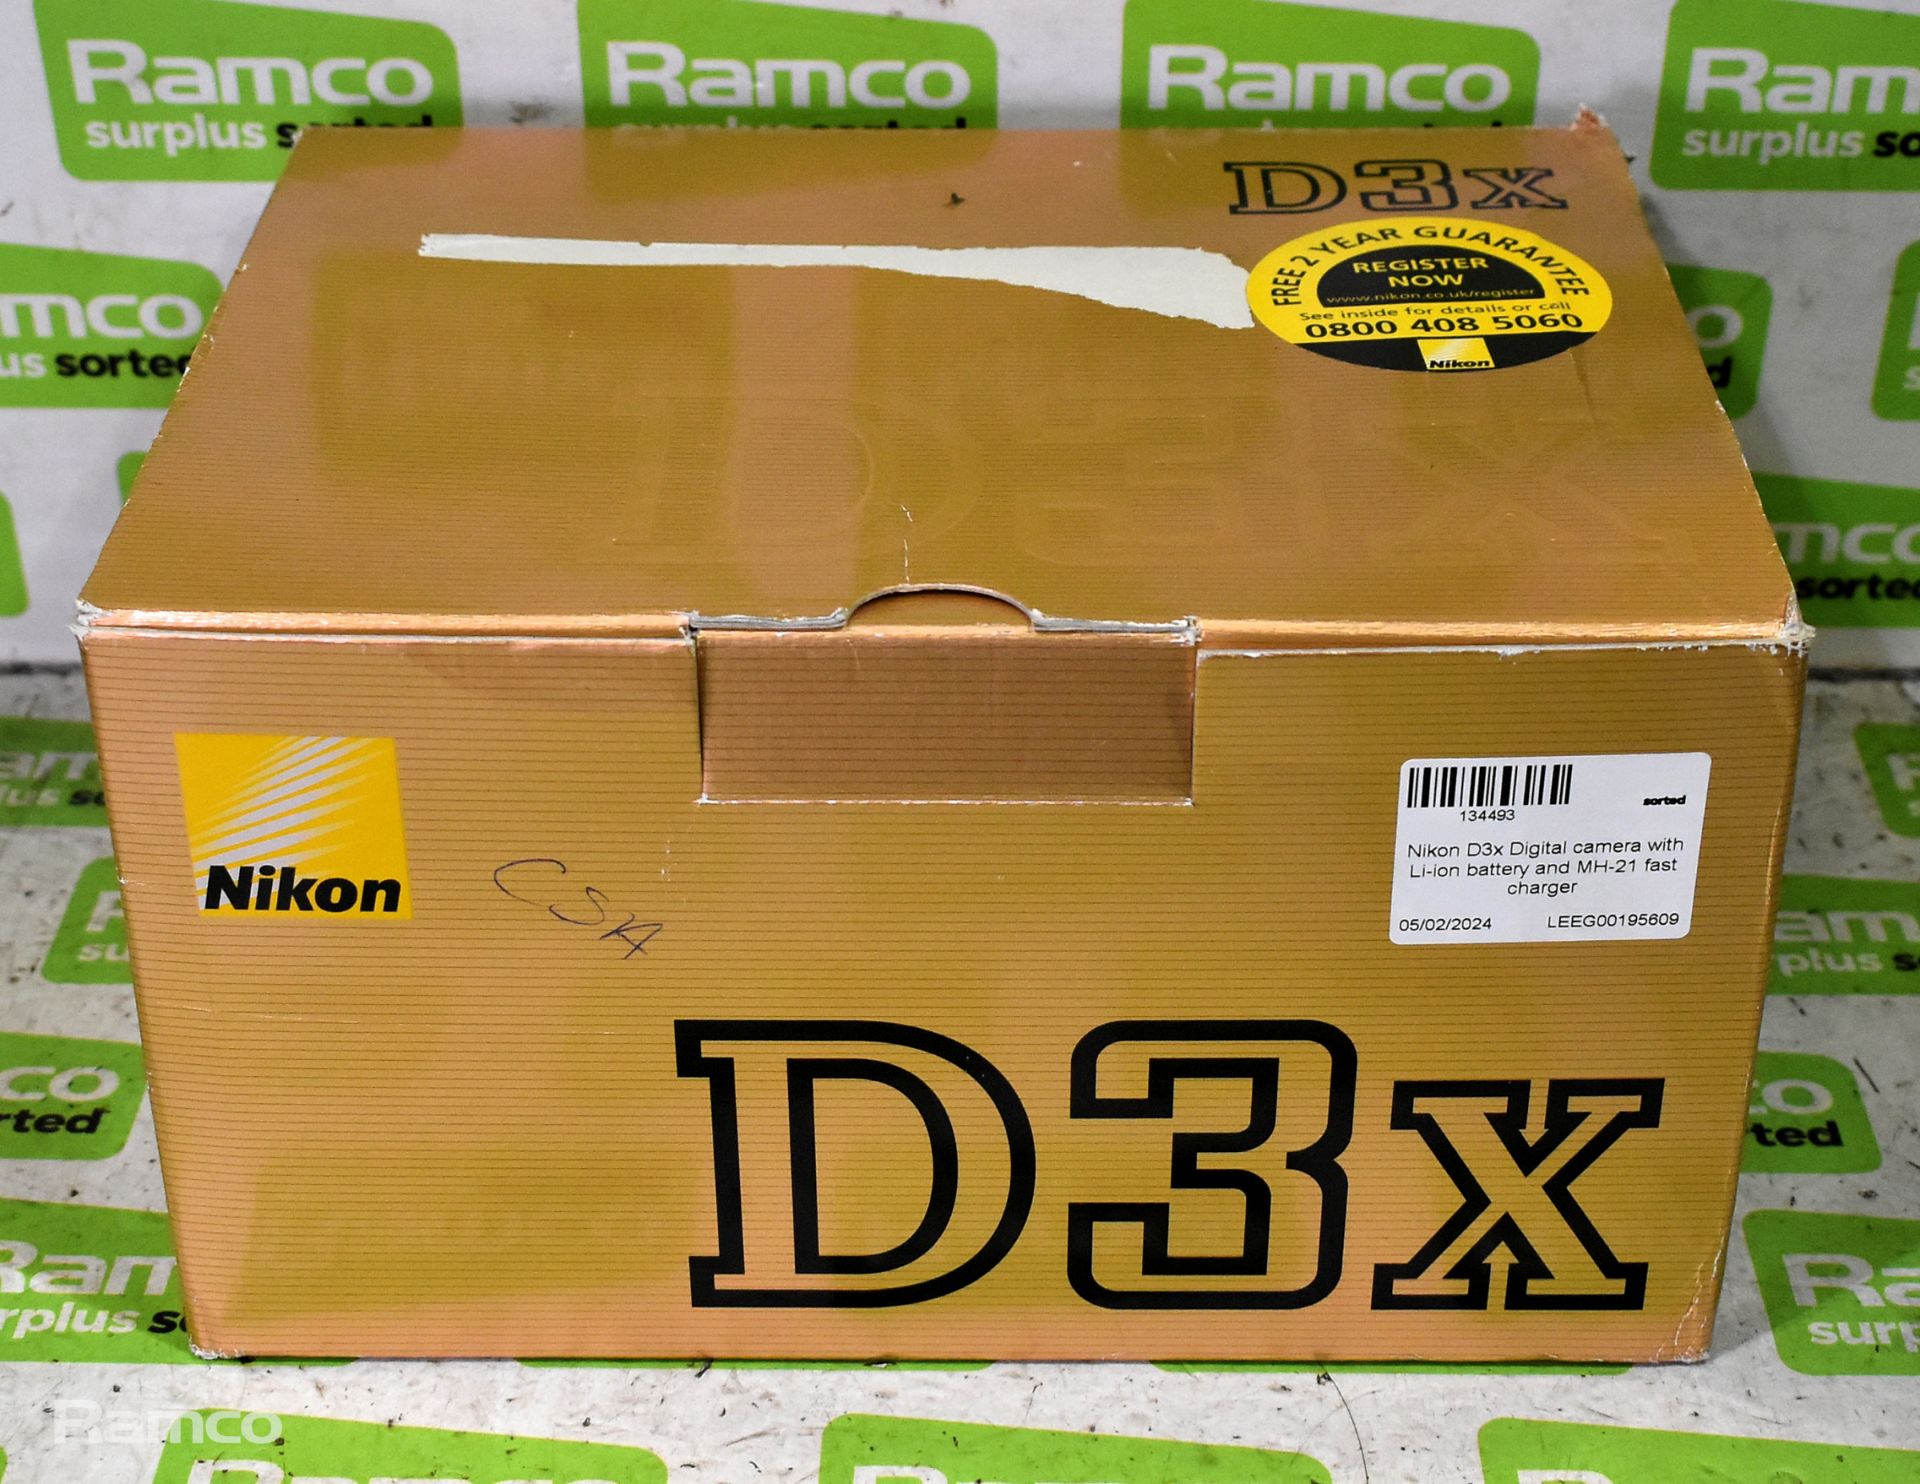 Nikon D3x Digital camera with Li-ion battery and MH-21 fast charger - Image 14 of 14